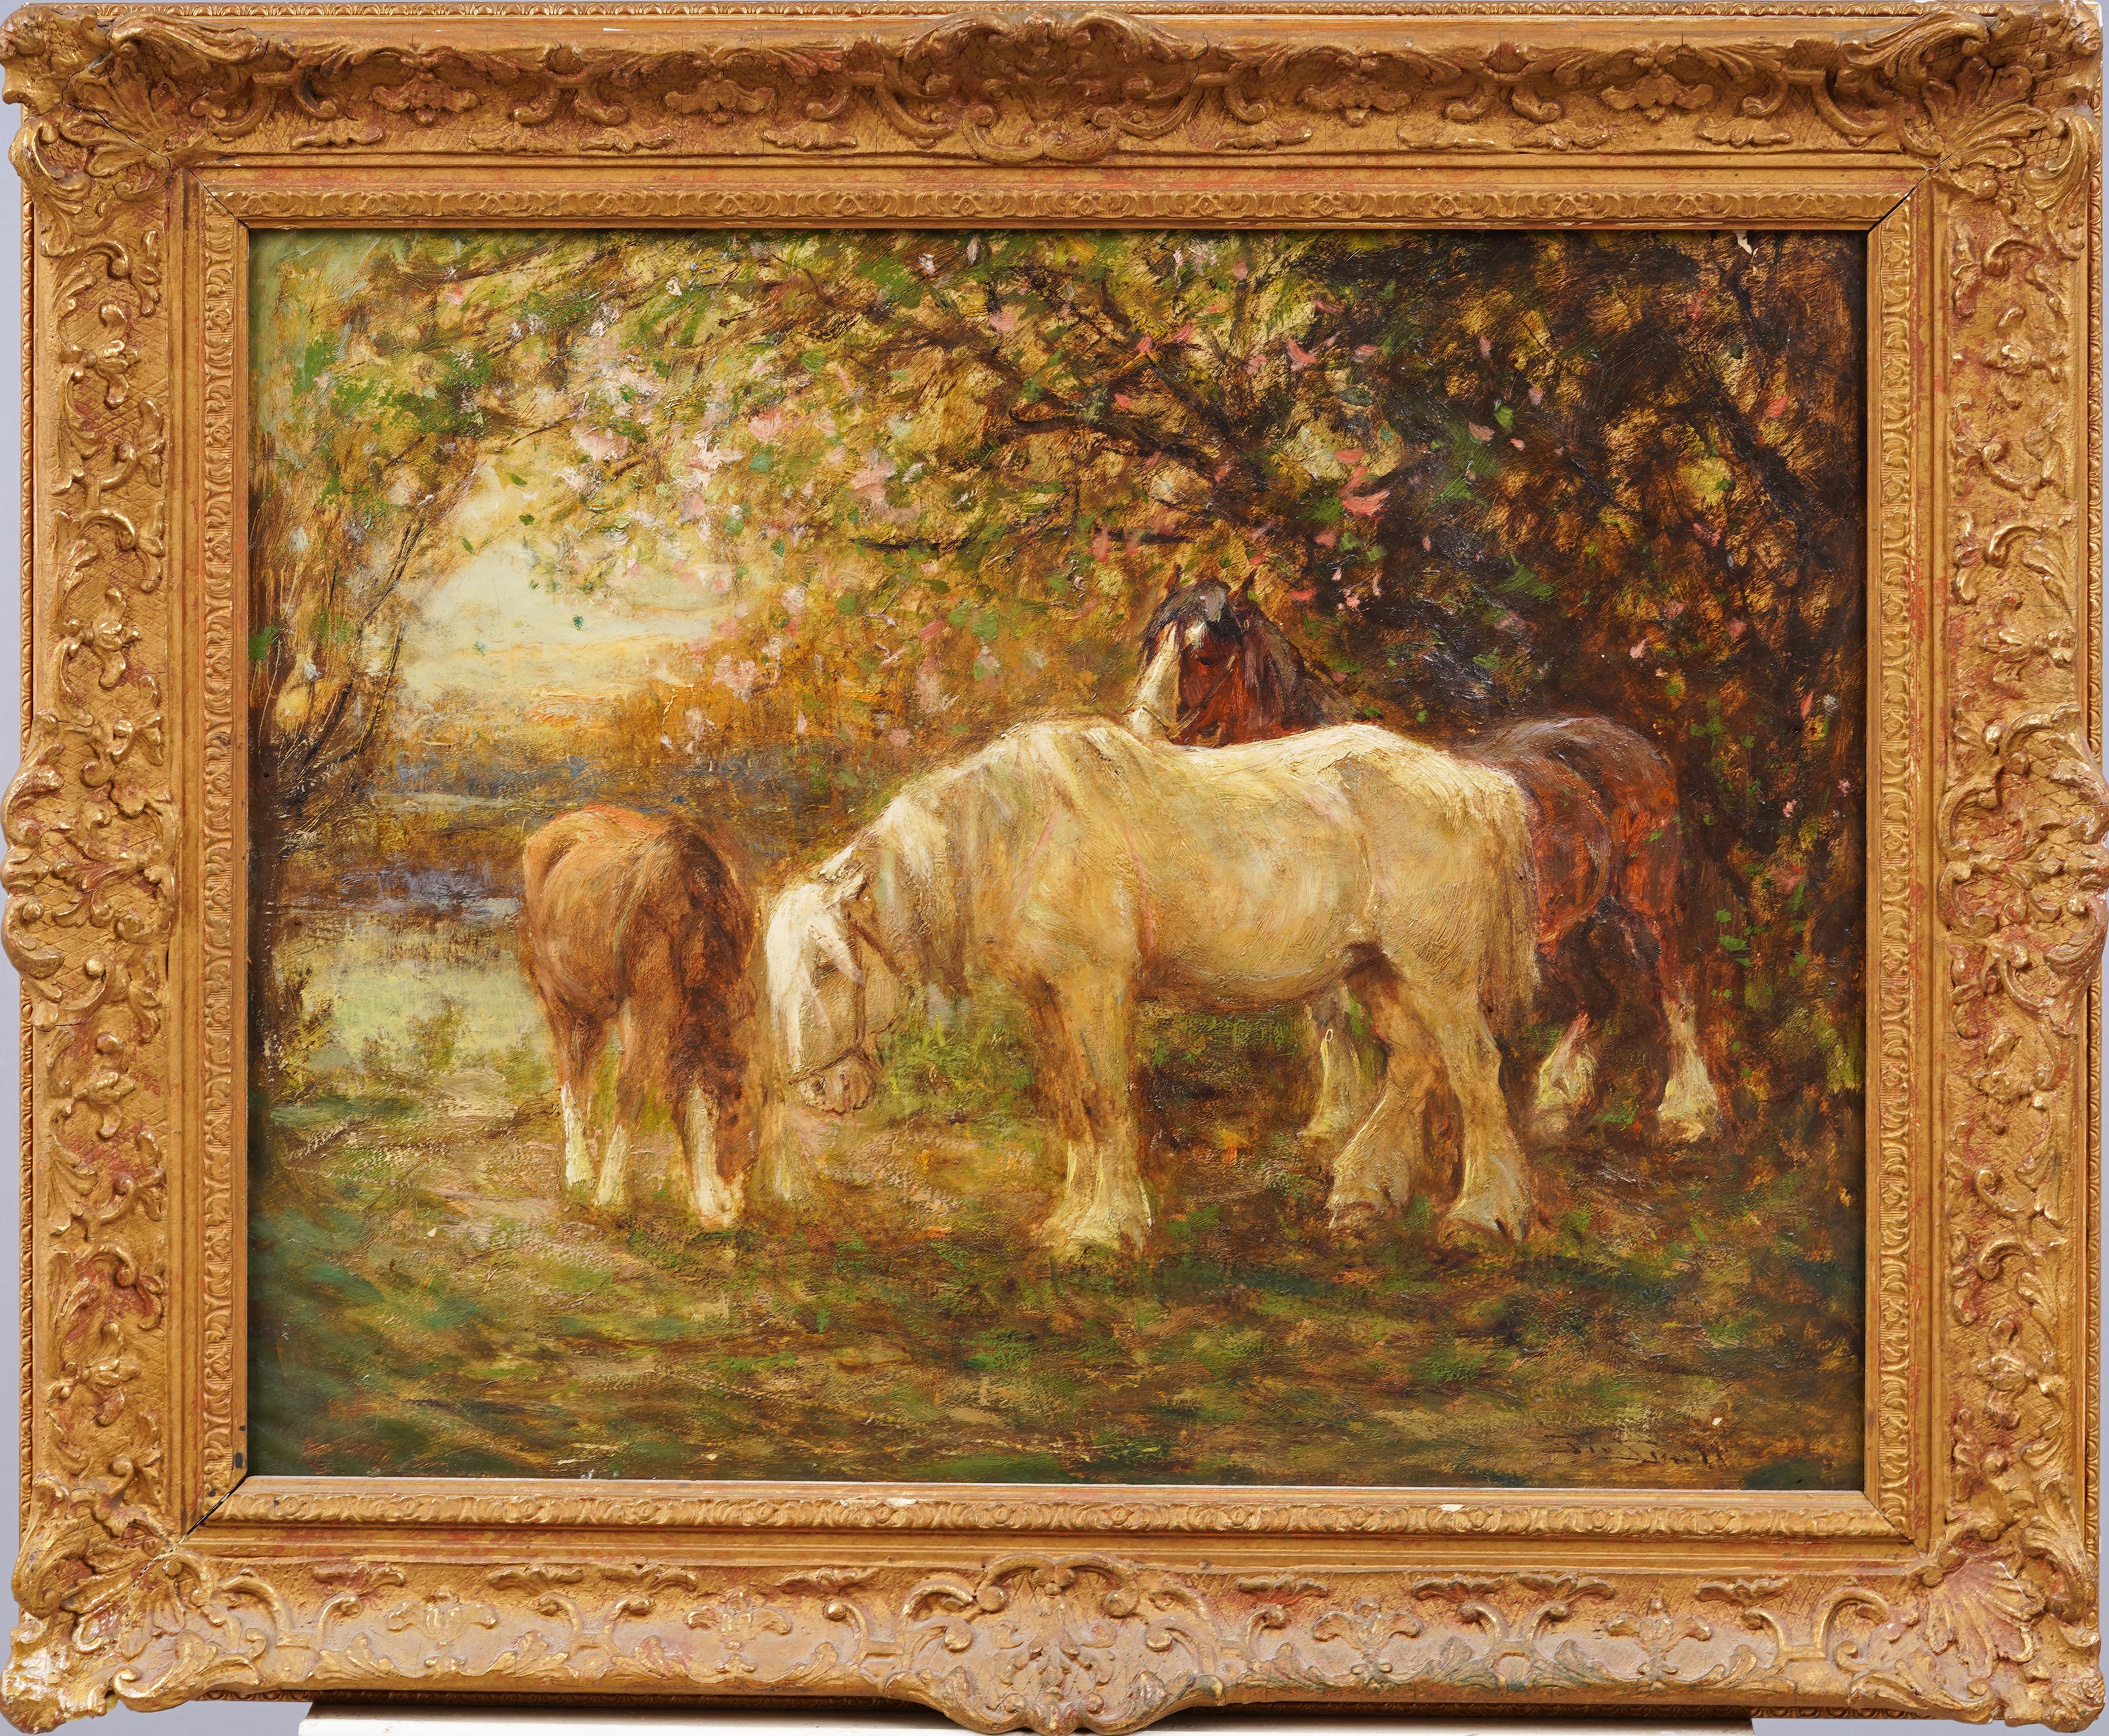 Really nicely painted 19th century English equine landscape by George Smith (1870 - 1934).  Oil on canvas. Signed.  Handsomely framed. 